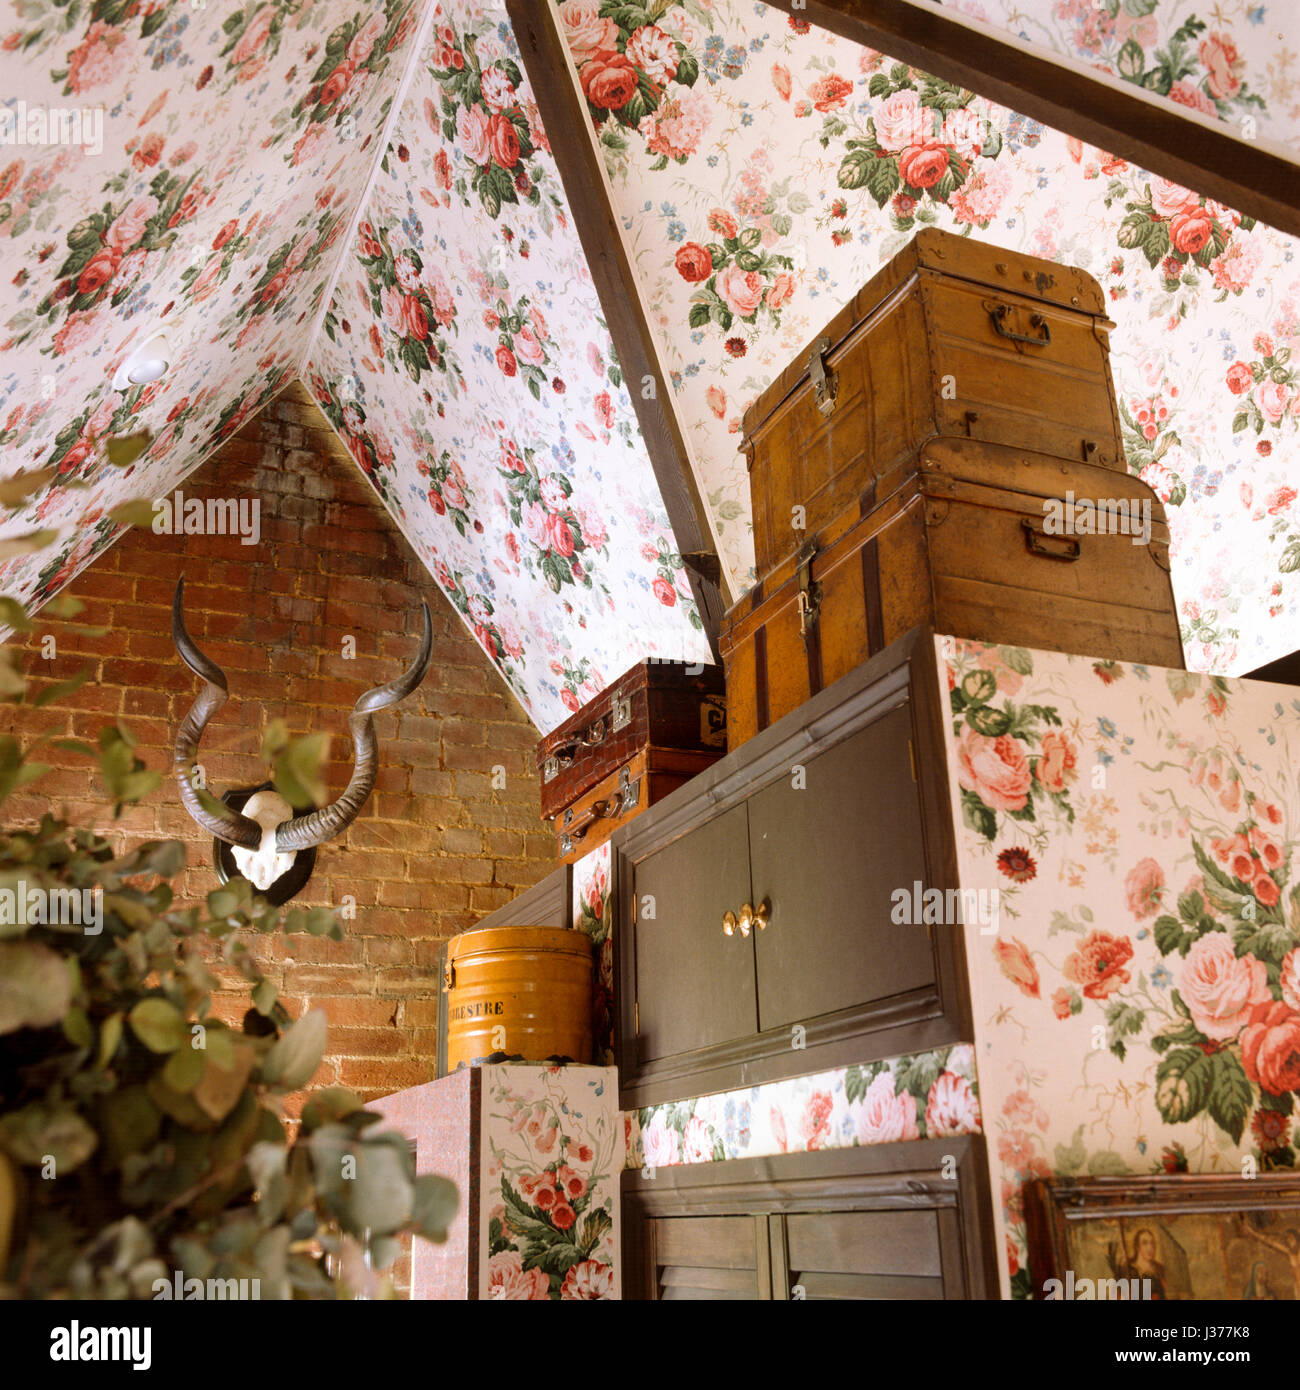 Assorted storage and floral wallpaper on the ceiling above. Stock Photo